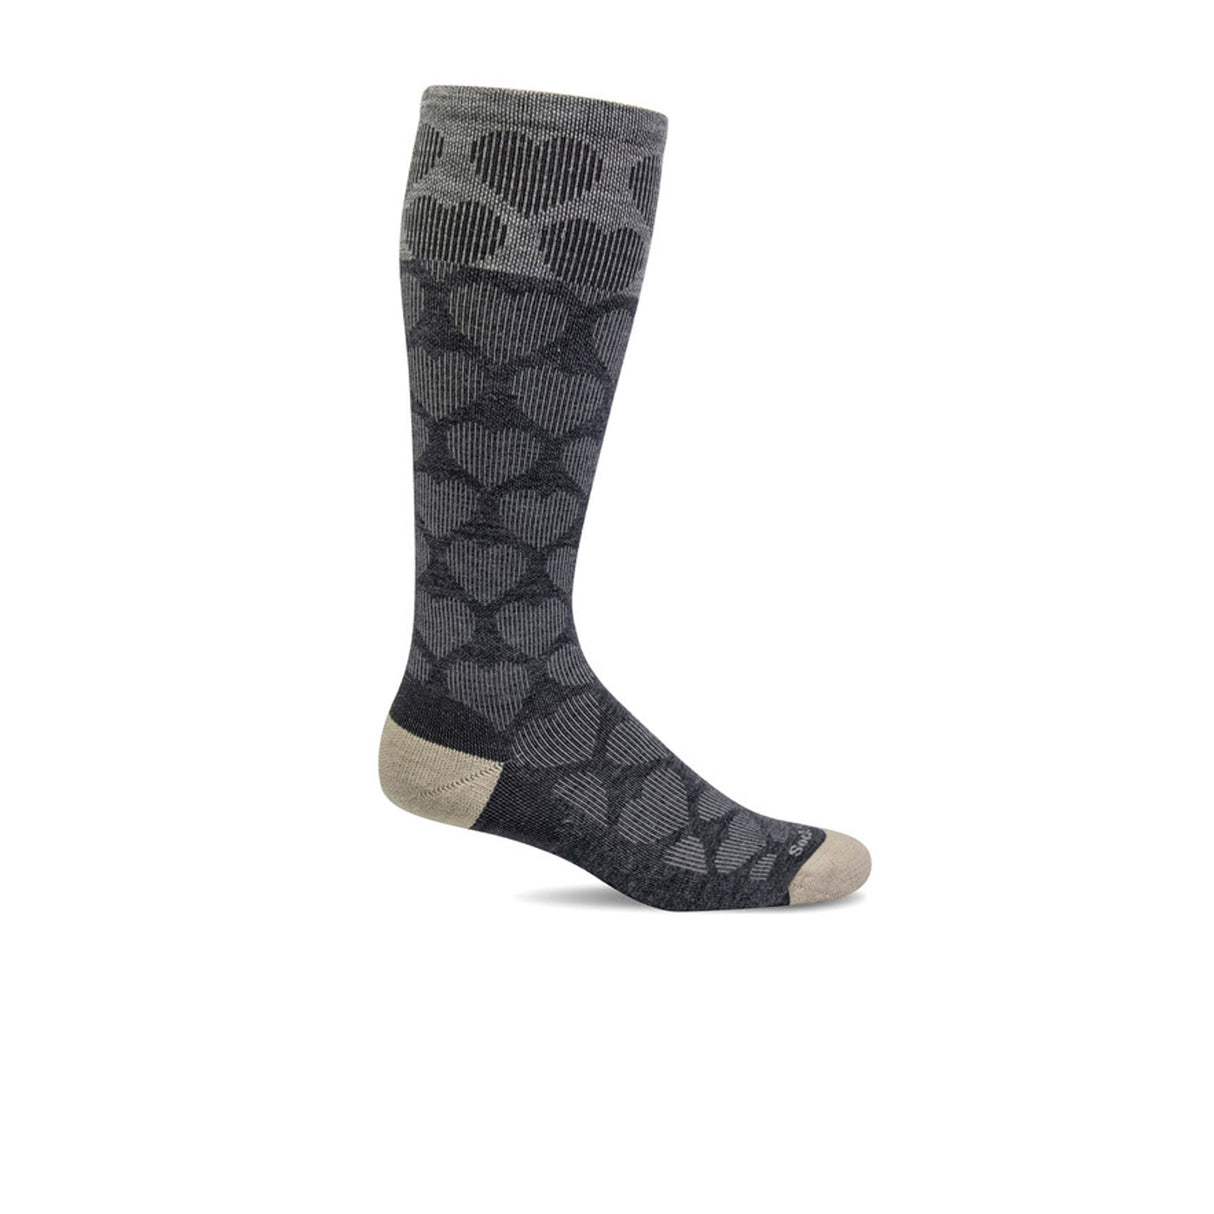 Sockwell Heart Throb Over the Calf Compression Sock (Women) - Charcoal Accessories - Socks - Compression - The Heel Shoe Fitters